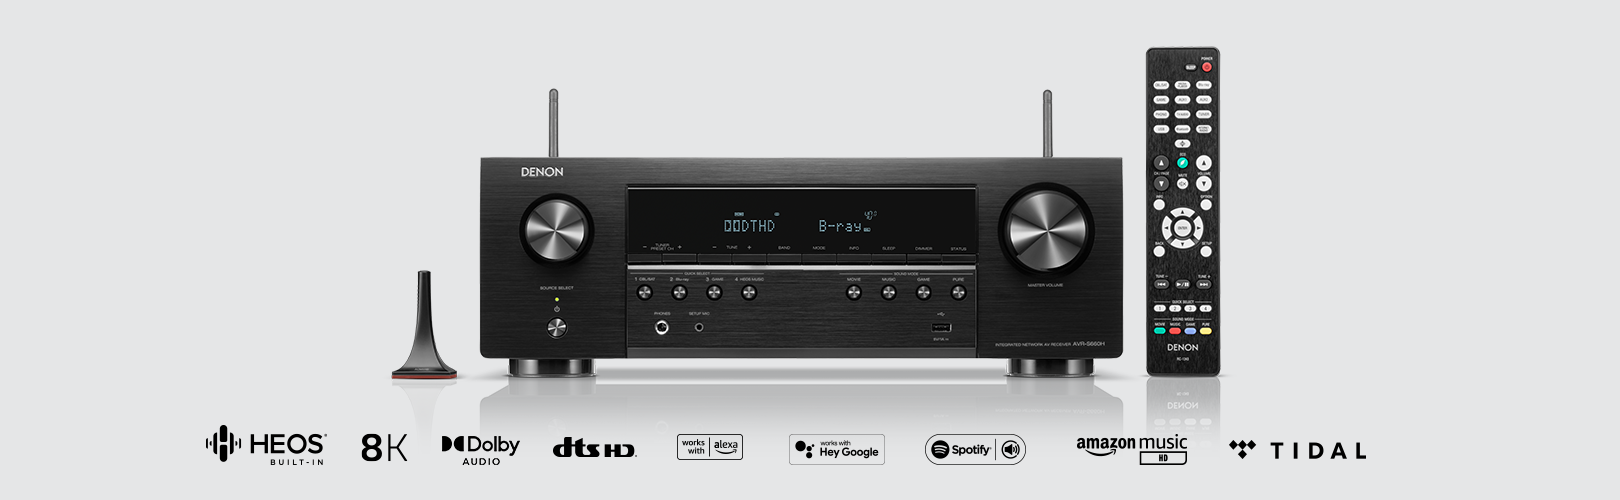 Denon releases two affordable S-series AV Receivers with multiple HDMI 2.1 inputs By WhatHifi